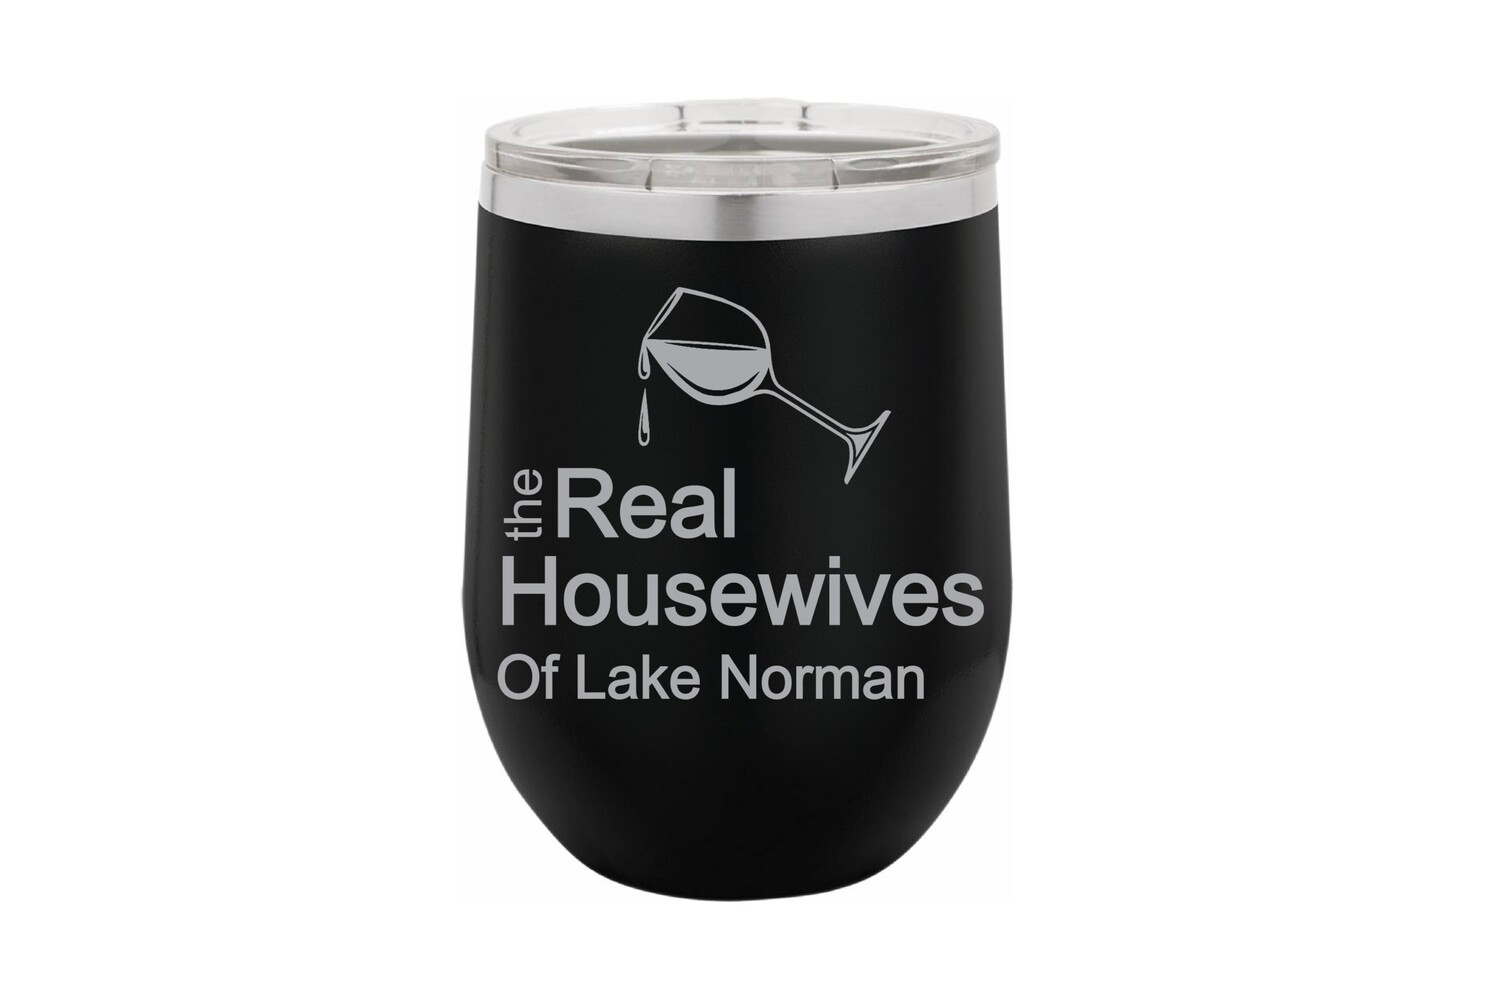 The Real Housewives of (Choose Image and Add Location) Insulated Tumbler 12 oz